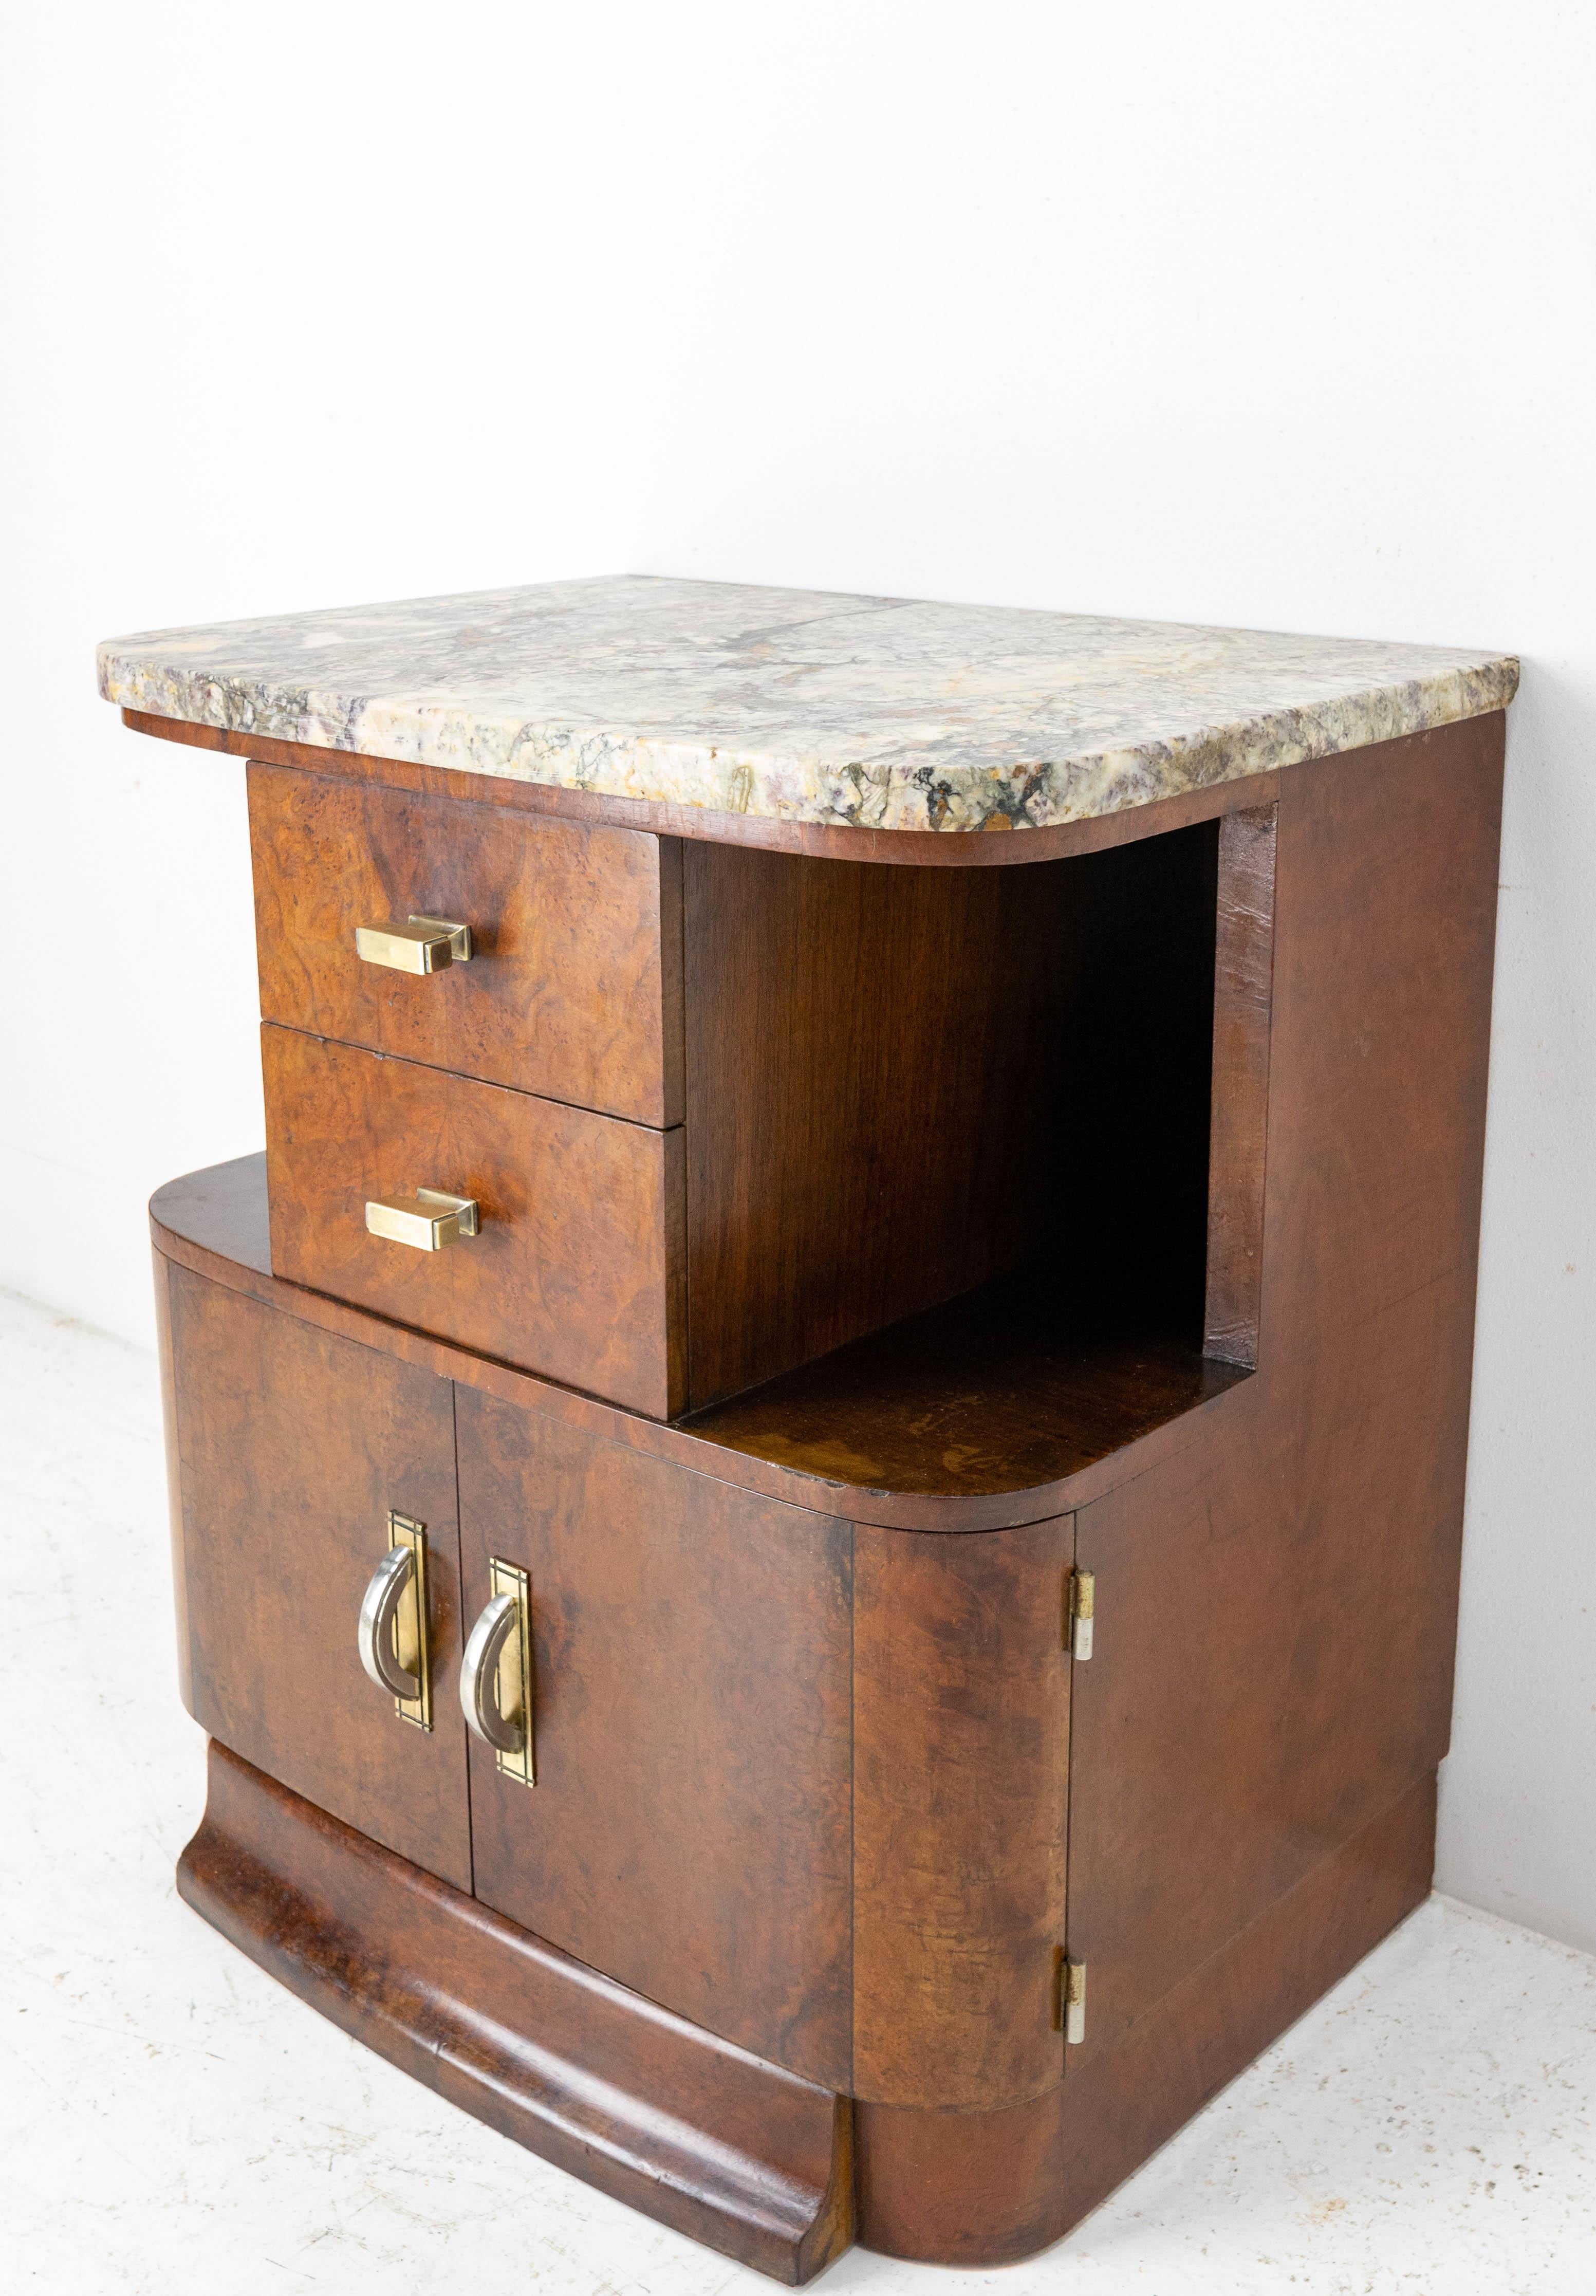 Mid-20th Century French Art Deco Side Table or Nightstand Table Burled Walnut Top Marble, c. 1930